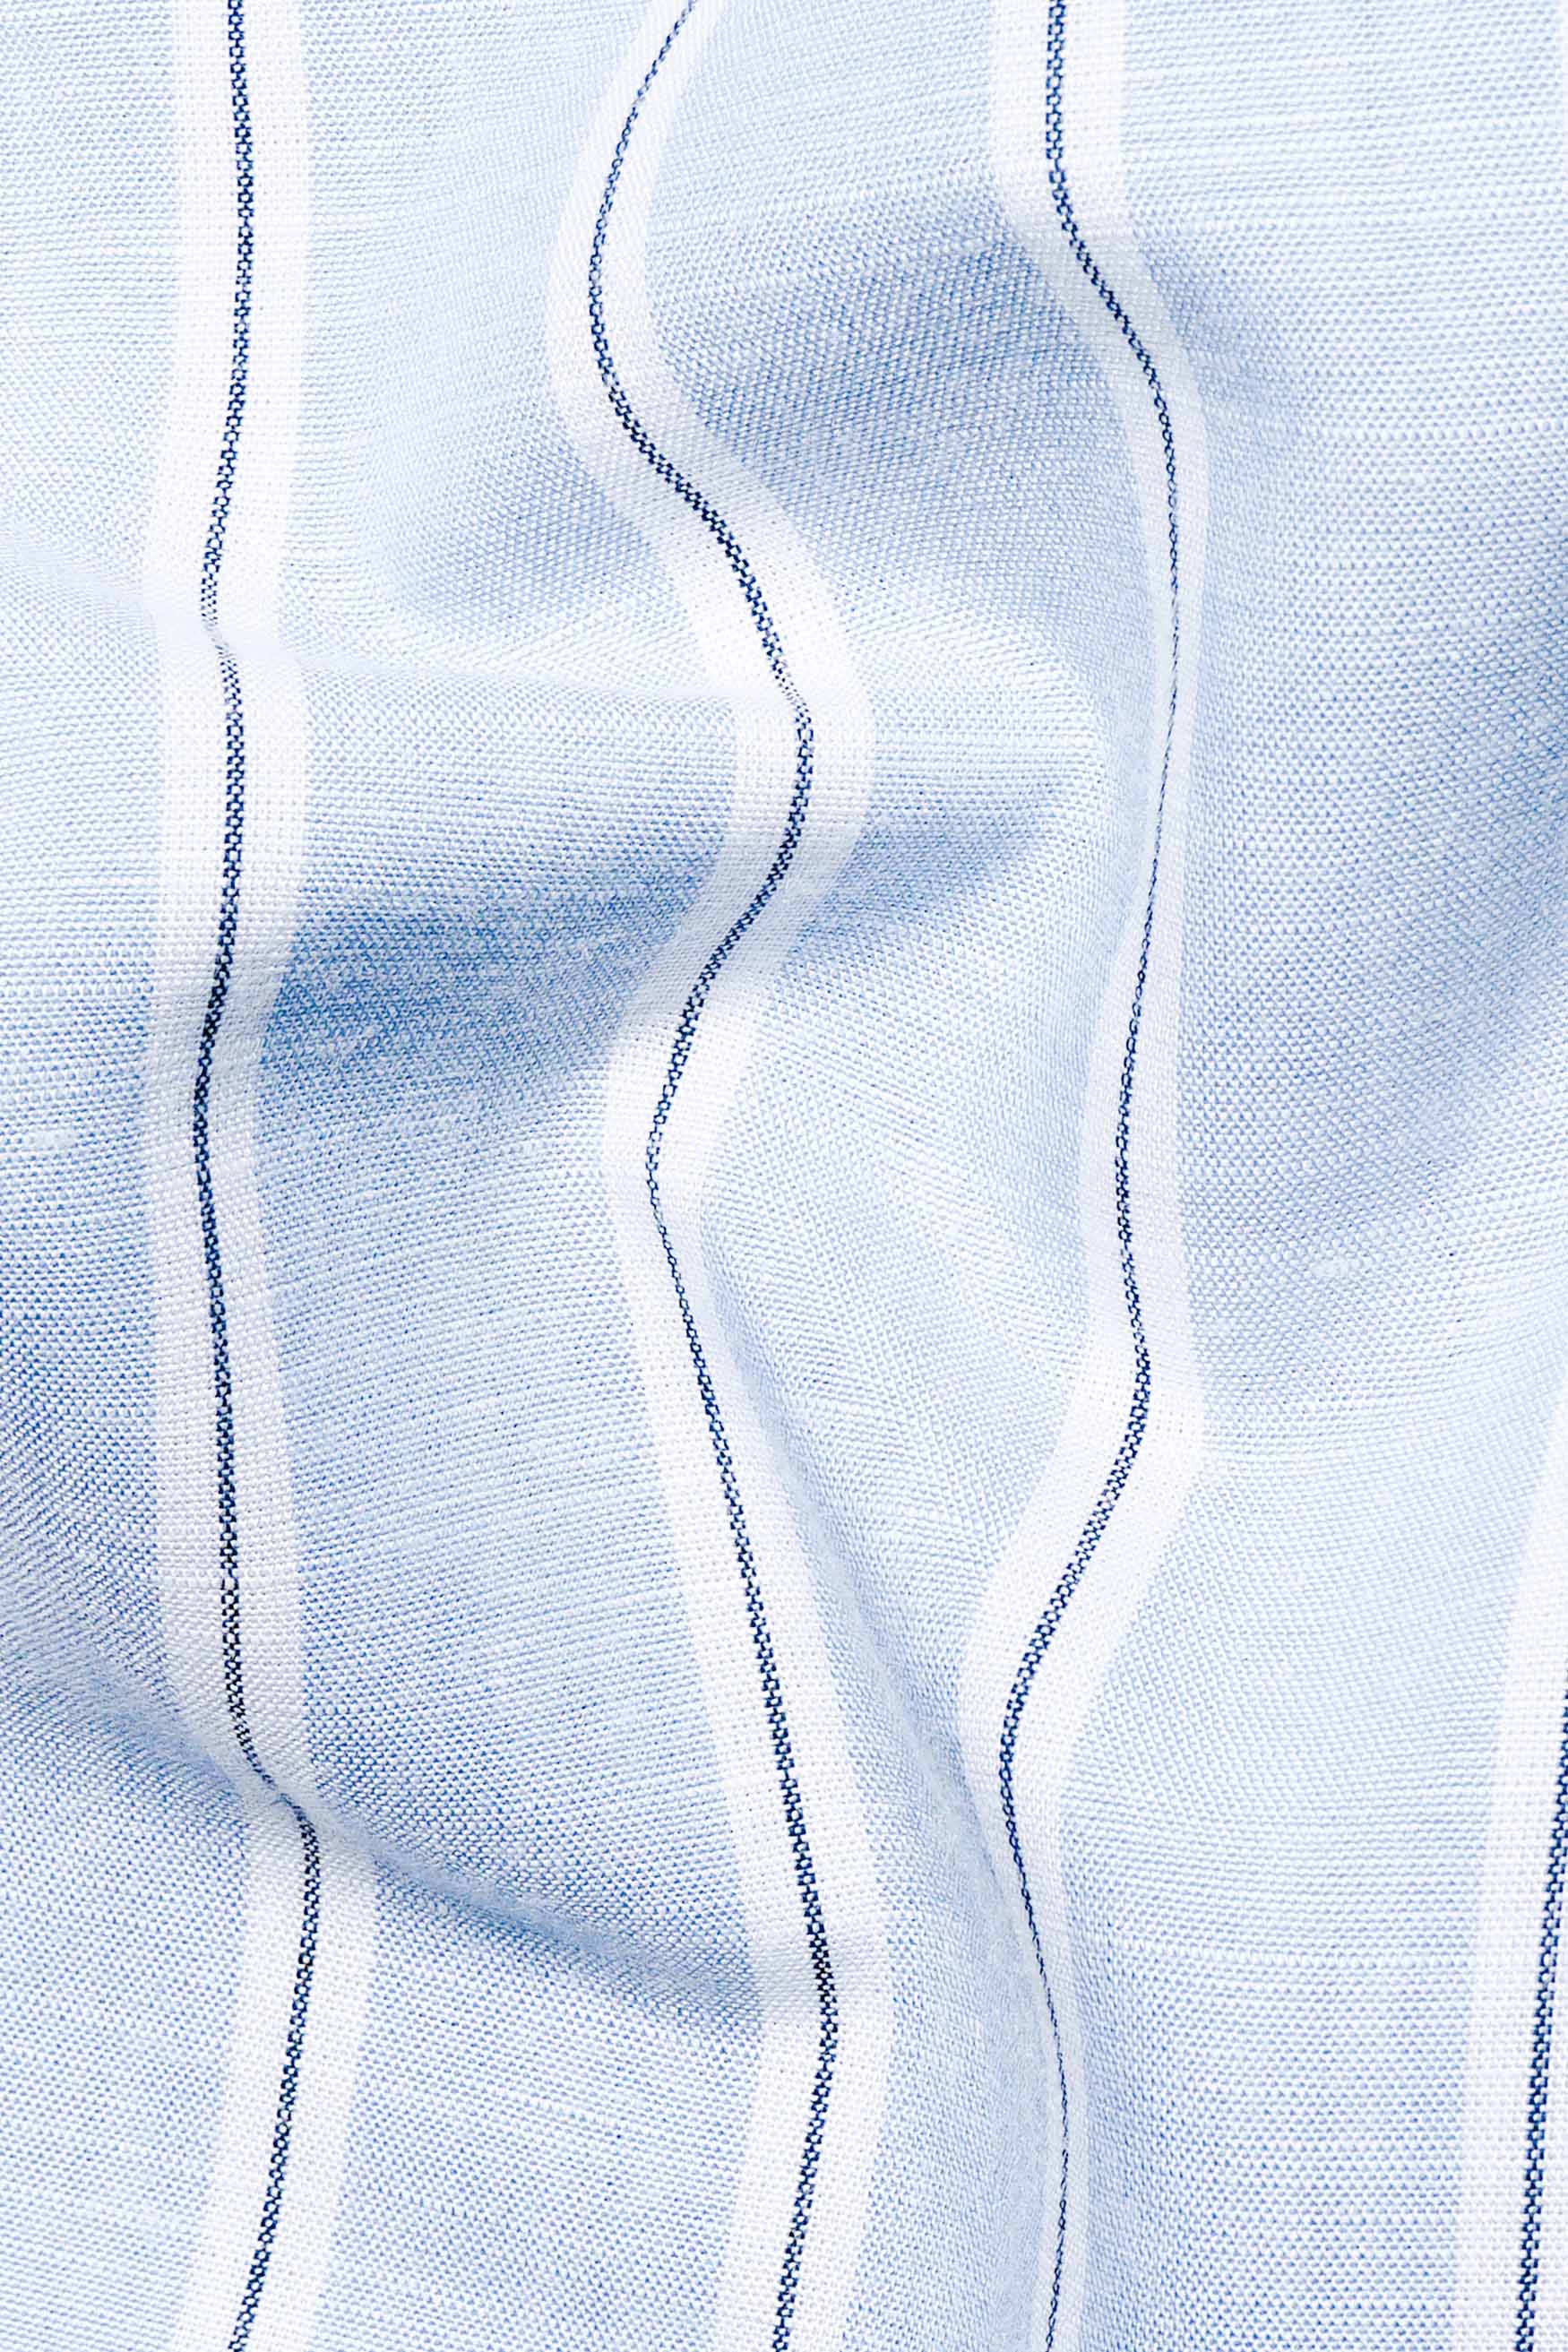 Periwinkle Blue and Bright White Striped with Patchwork Twill Premium Cotton Designer Shirt 7572-E290-38, 7572-E290-H-38, 7572-E290-39, 7572-E290-H-39, 7572-E290-40, 7572-E290-H-40, 7572-E290-42, 7572-E290-H-42, 7572-E290-44, 7572-E290-H-44, 7572-E290-46, 7572-E290-H-46, 7572-E290-48, 7572-E290-H-48, 7572-E290-50, 7572-E290-H-50, 7572-E290-52, 7572-E290-H-52